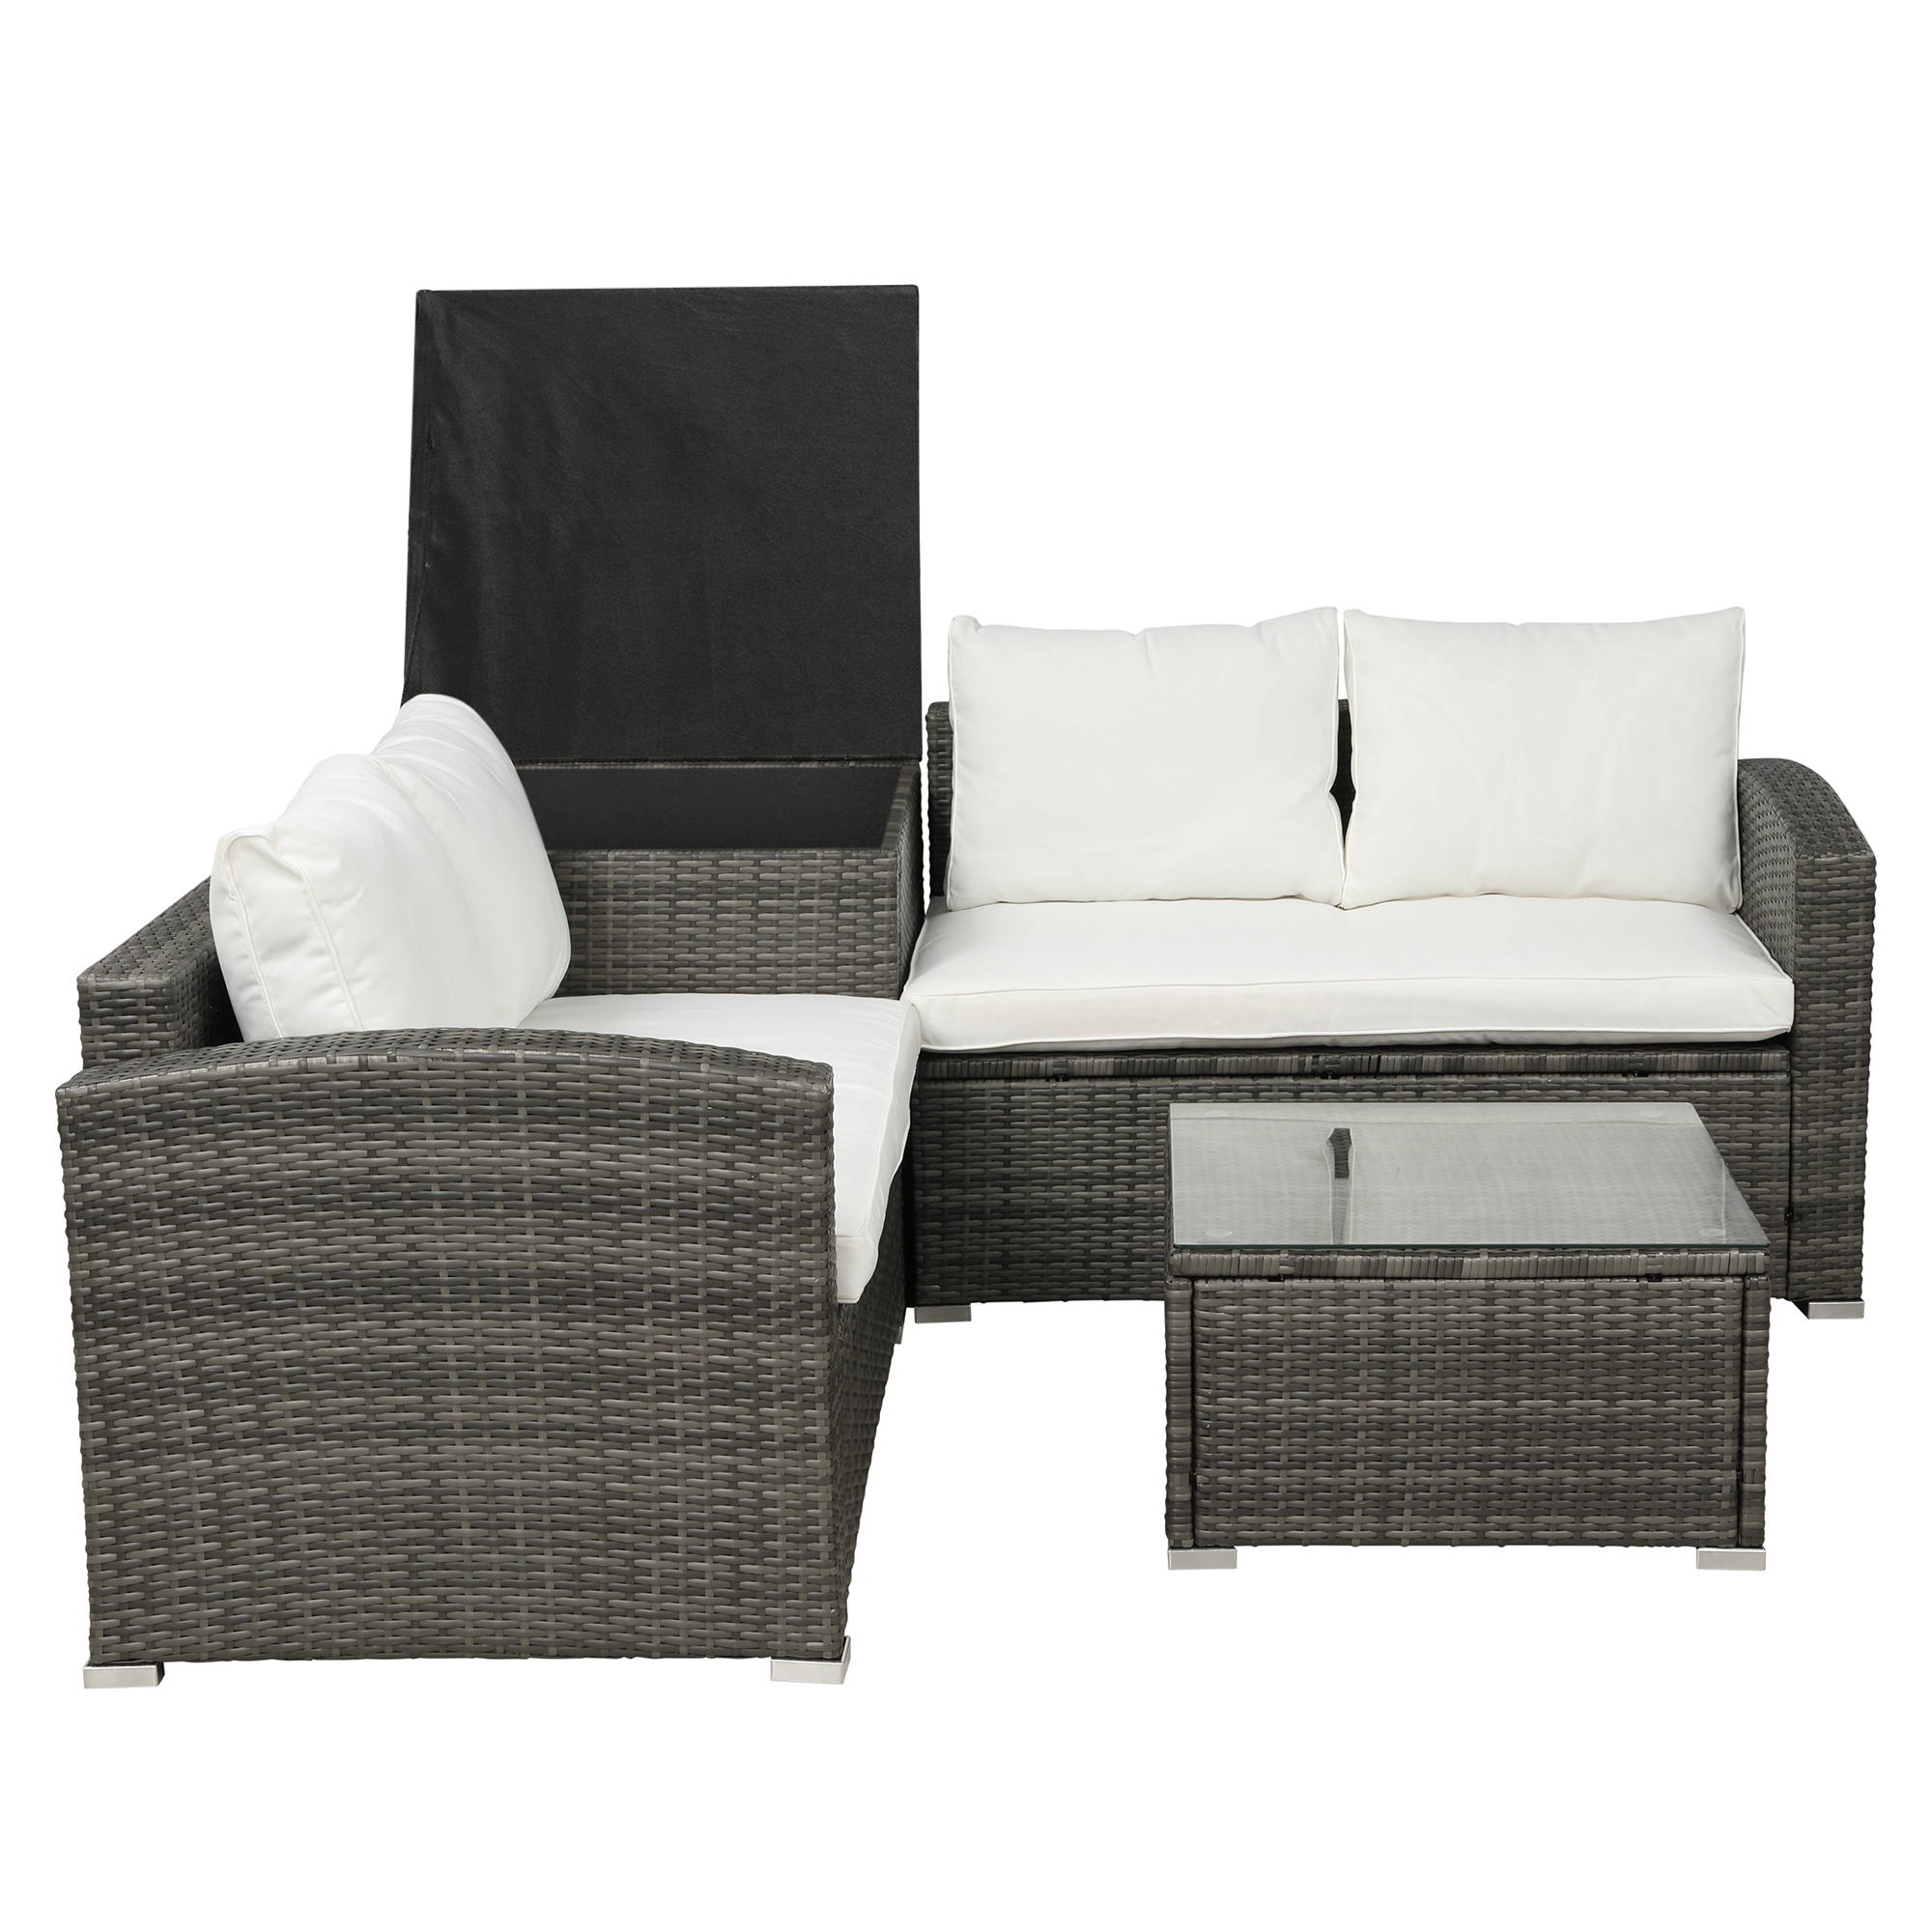 Outdoor Patio Furniture Set, 4-Piece Gray Wicker Patio Furniture Sets, Rattan Wicker Conversation Set w/L-Seats Sofa, R-Seats Sofa, Cushion box, Glass Dining Table, Padded Cushions, Beige, S13126 - image 4 of 7